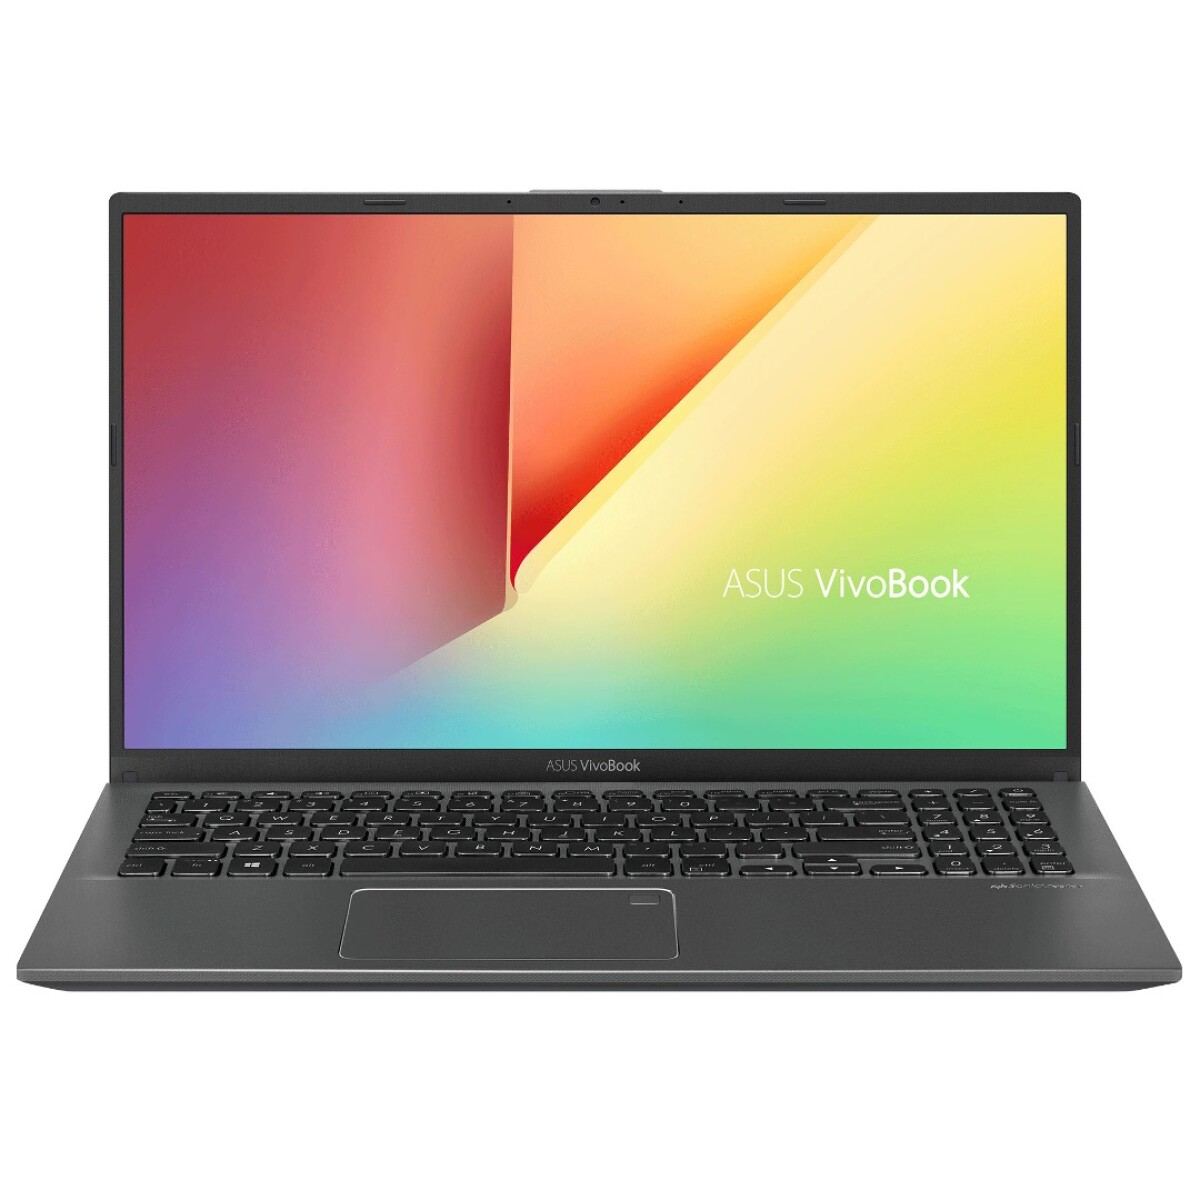 Notebook Asus Core I3 3.4GHZ, 8GB, 256GB Ssd, 15.6" Fhd, Win 10 - 001 